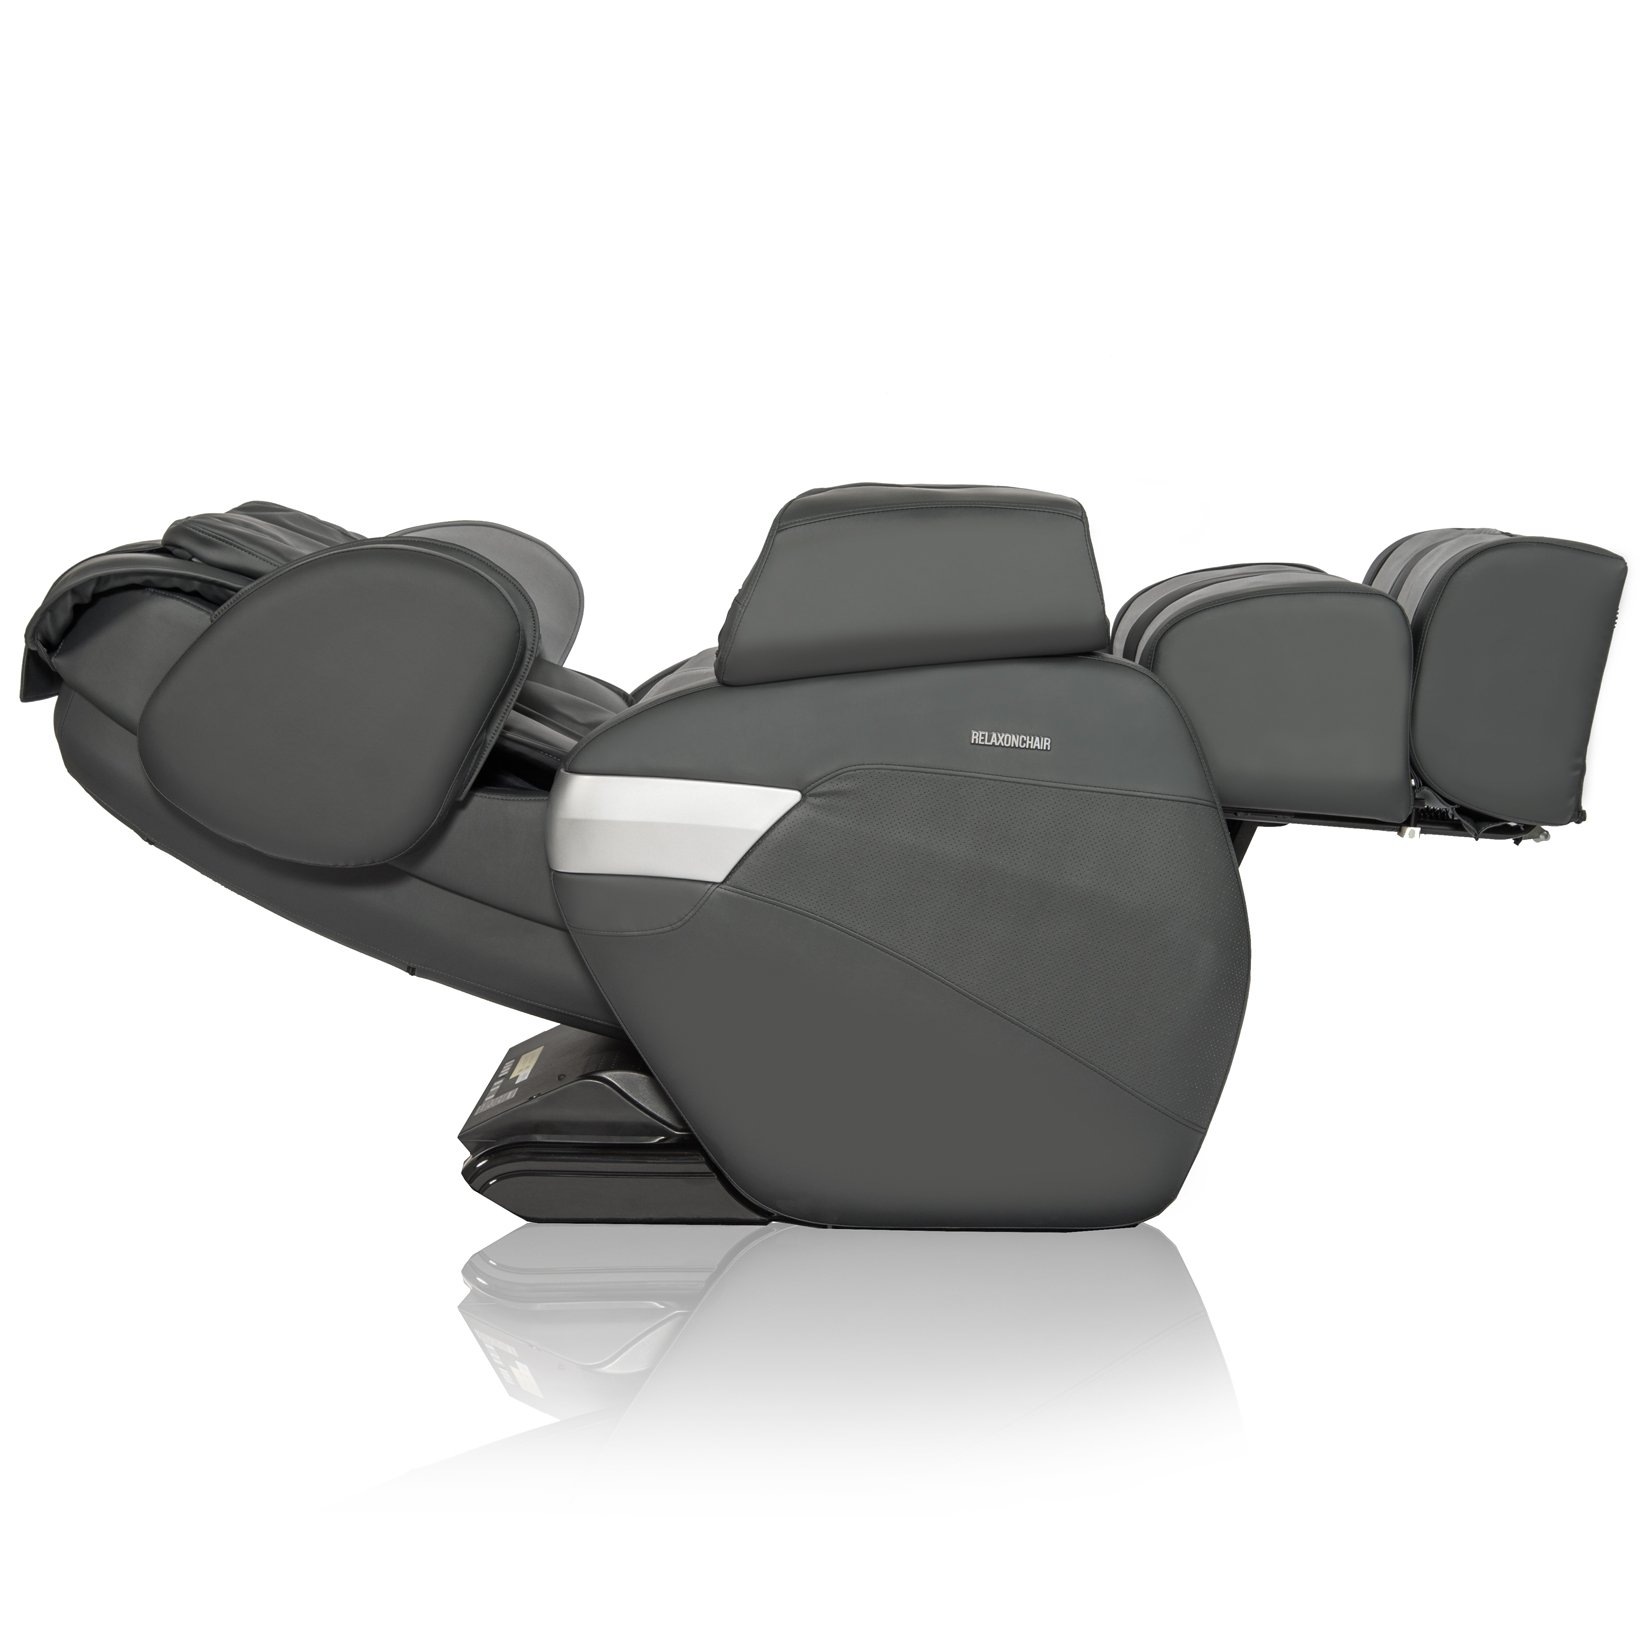 RELAXONCHAIR Full Body Massage Chair, MK-II PLUS - Charcoal (Gray) - image 3 of 8